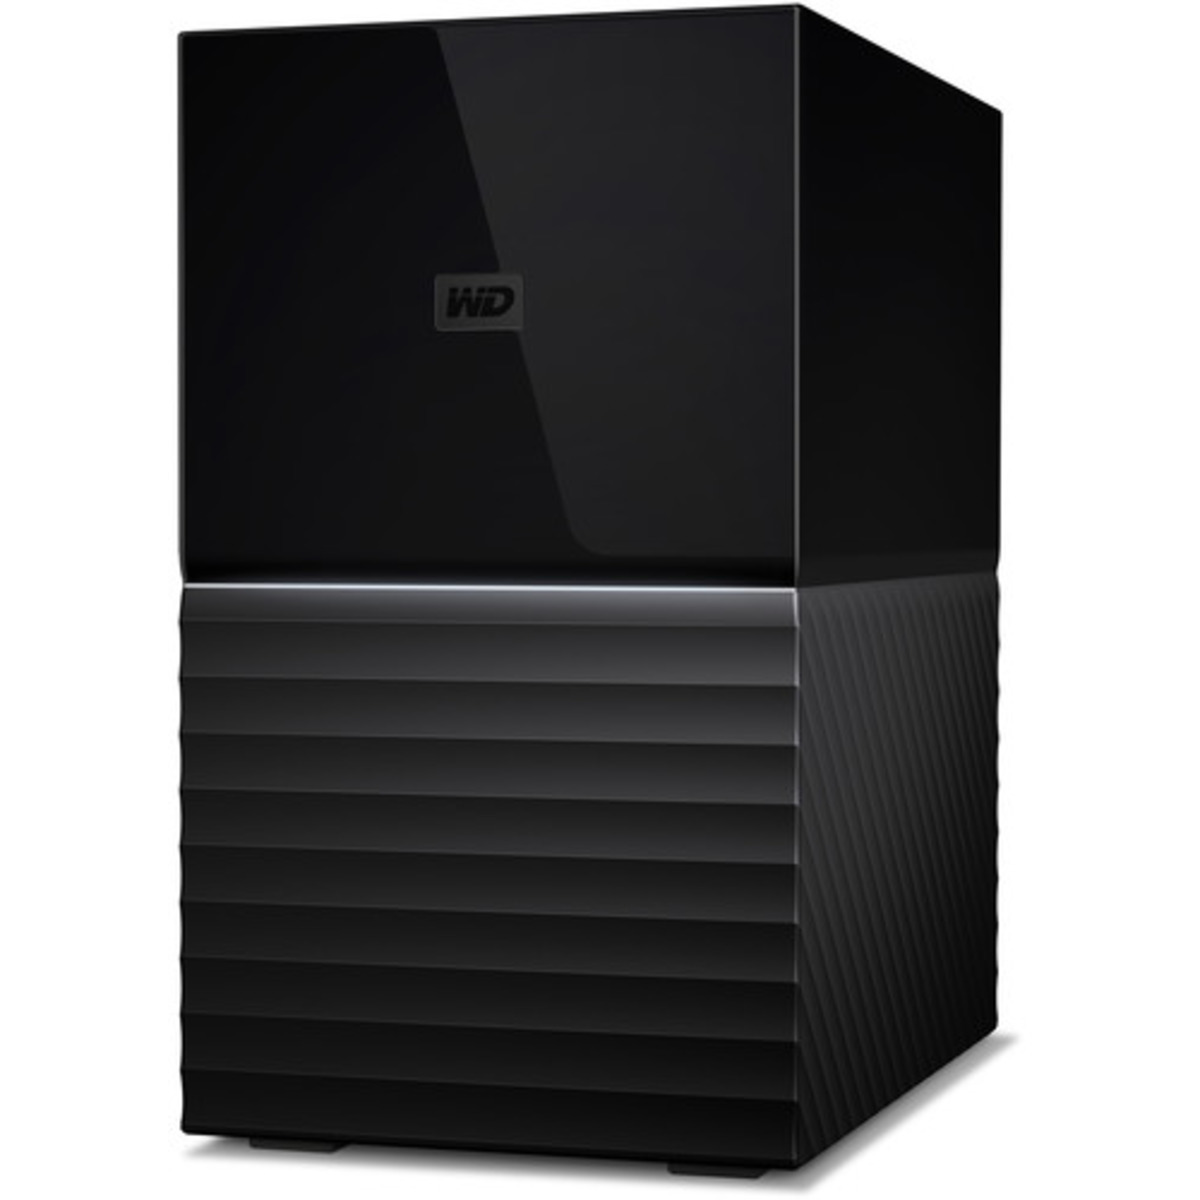 Western Digital My Book DUO Gen 2 6tb 2-Bay Desktop Personal / Basic Home / Small Office DAS - Direct Attached Storage Device 1x6tb Western Digital Red WD60EFAX 3.5 5400rpm SATA 6Gb/s HDD NAS Class Drives Installed - Burn-In Tested - ON SALE My Book DUO Gen 2